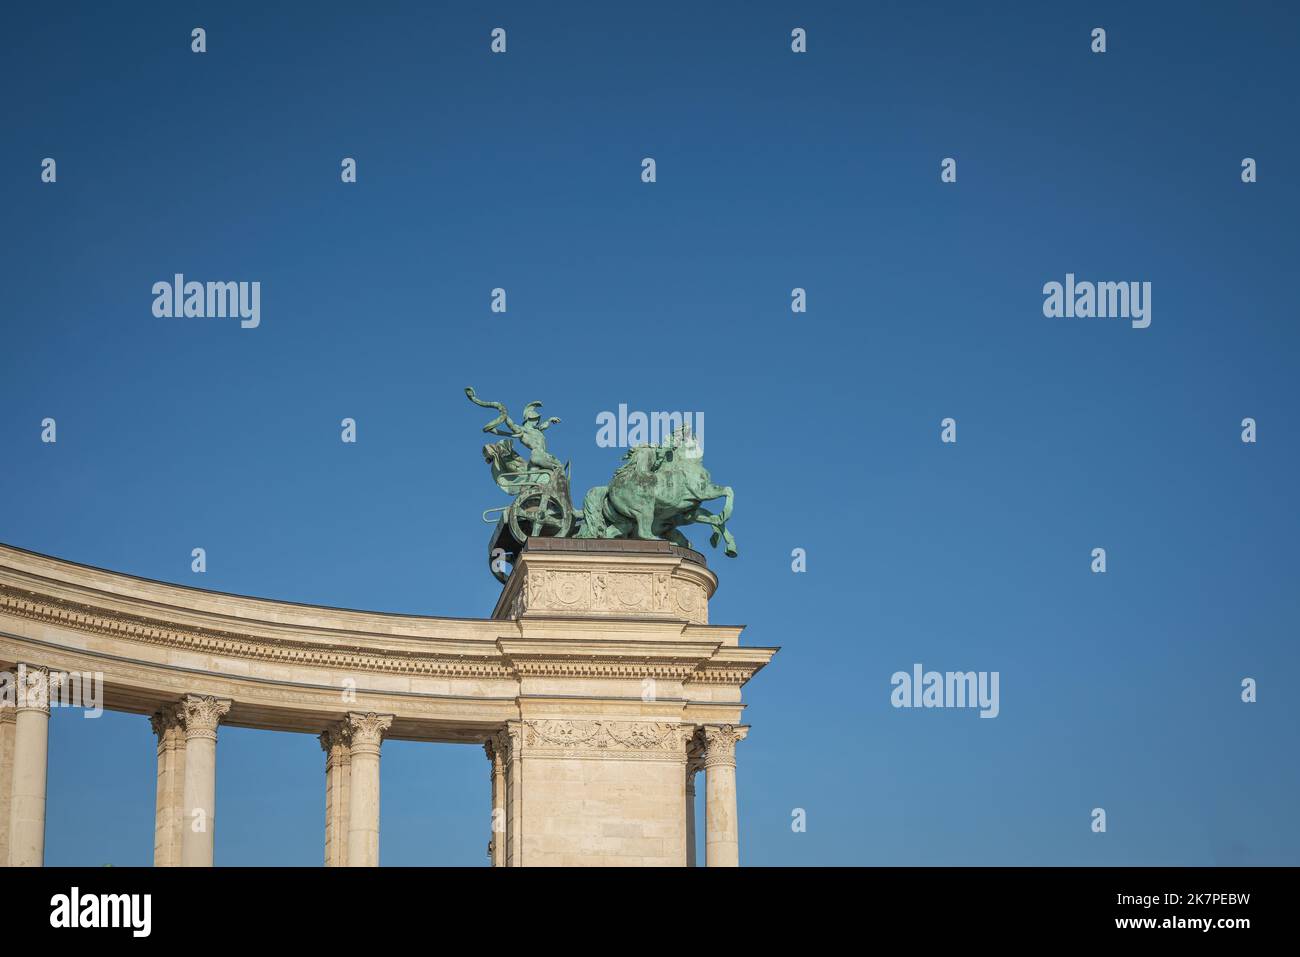 Charioteer with a snake sculpture symbolising War on top of Left Colonnade of the Millennium Monument at Heroes Square - Budapest, Hungary Stock Photo